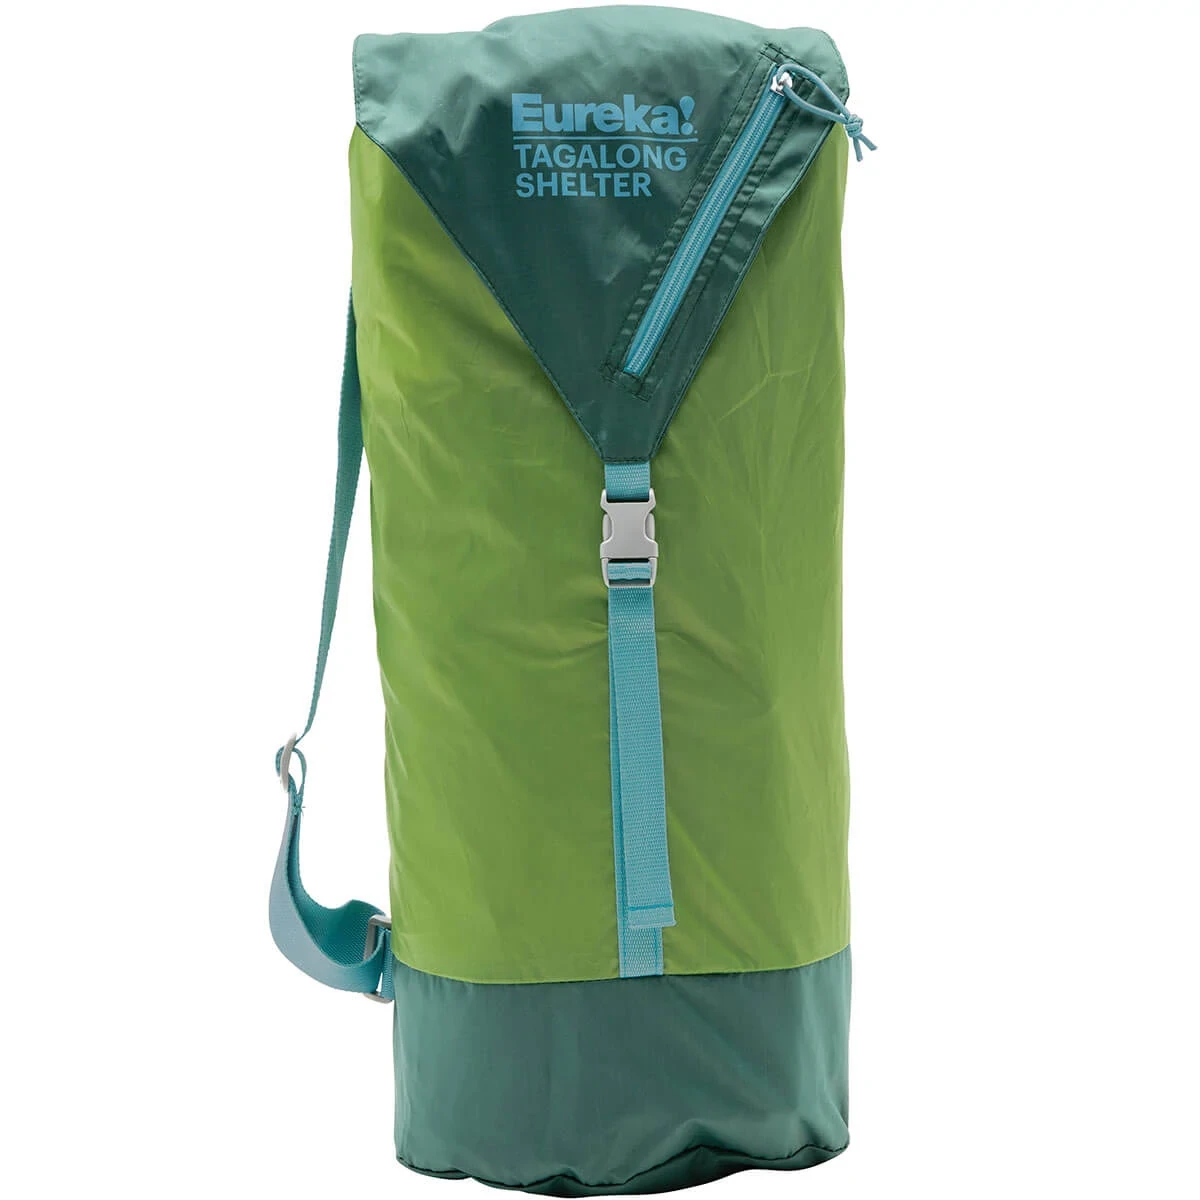 Eureka! Tagalong Shelter packed away in Carry Bag